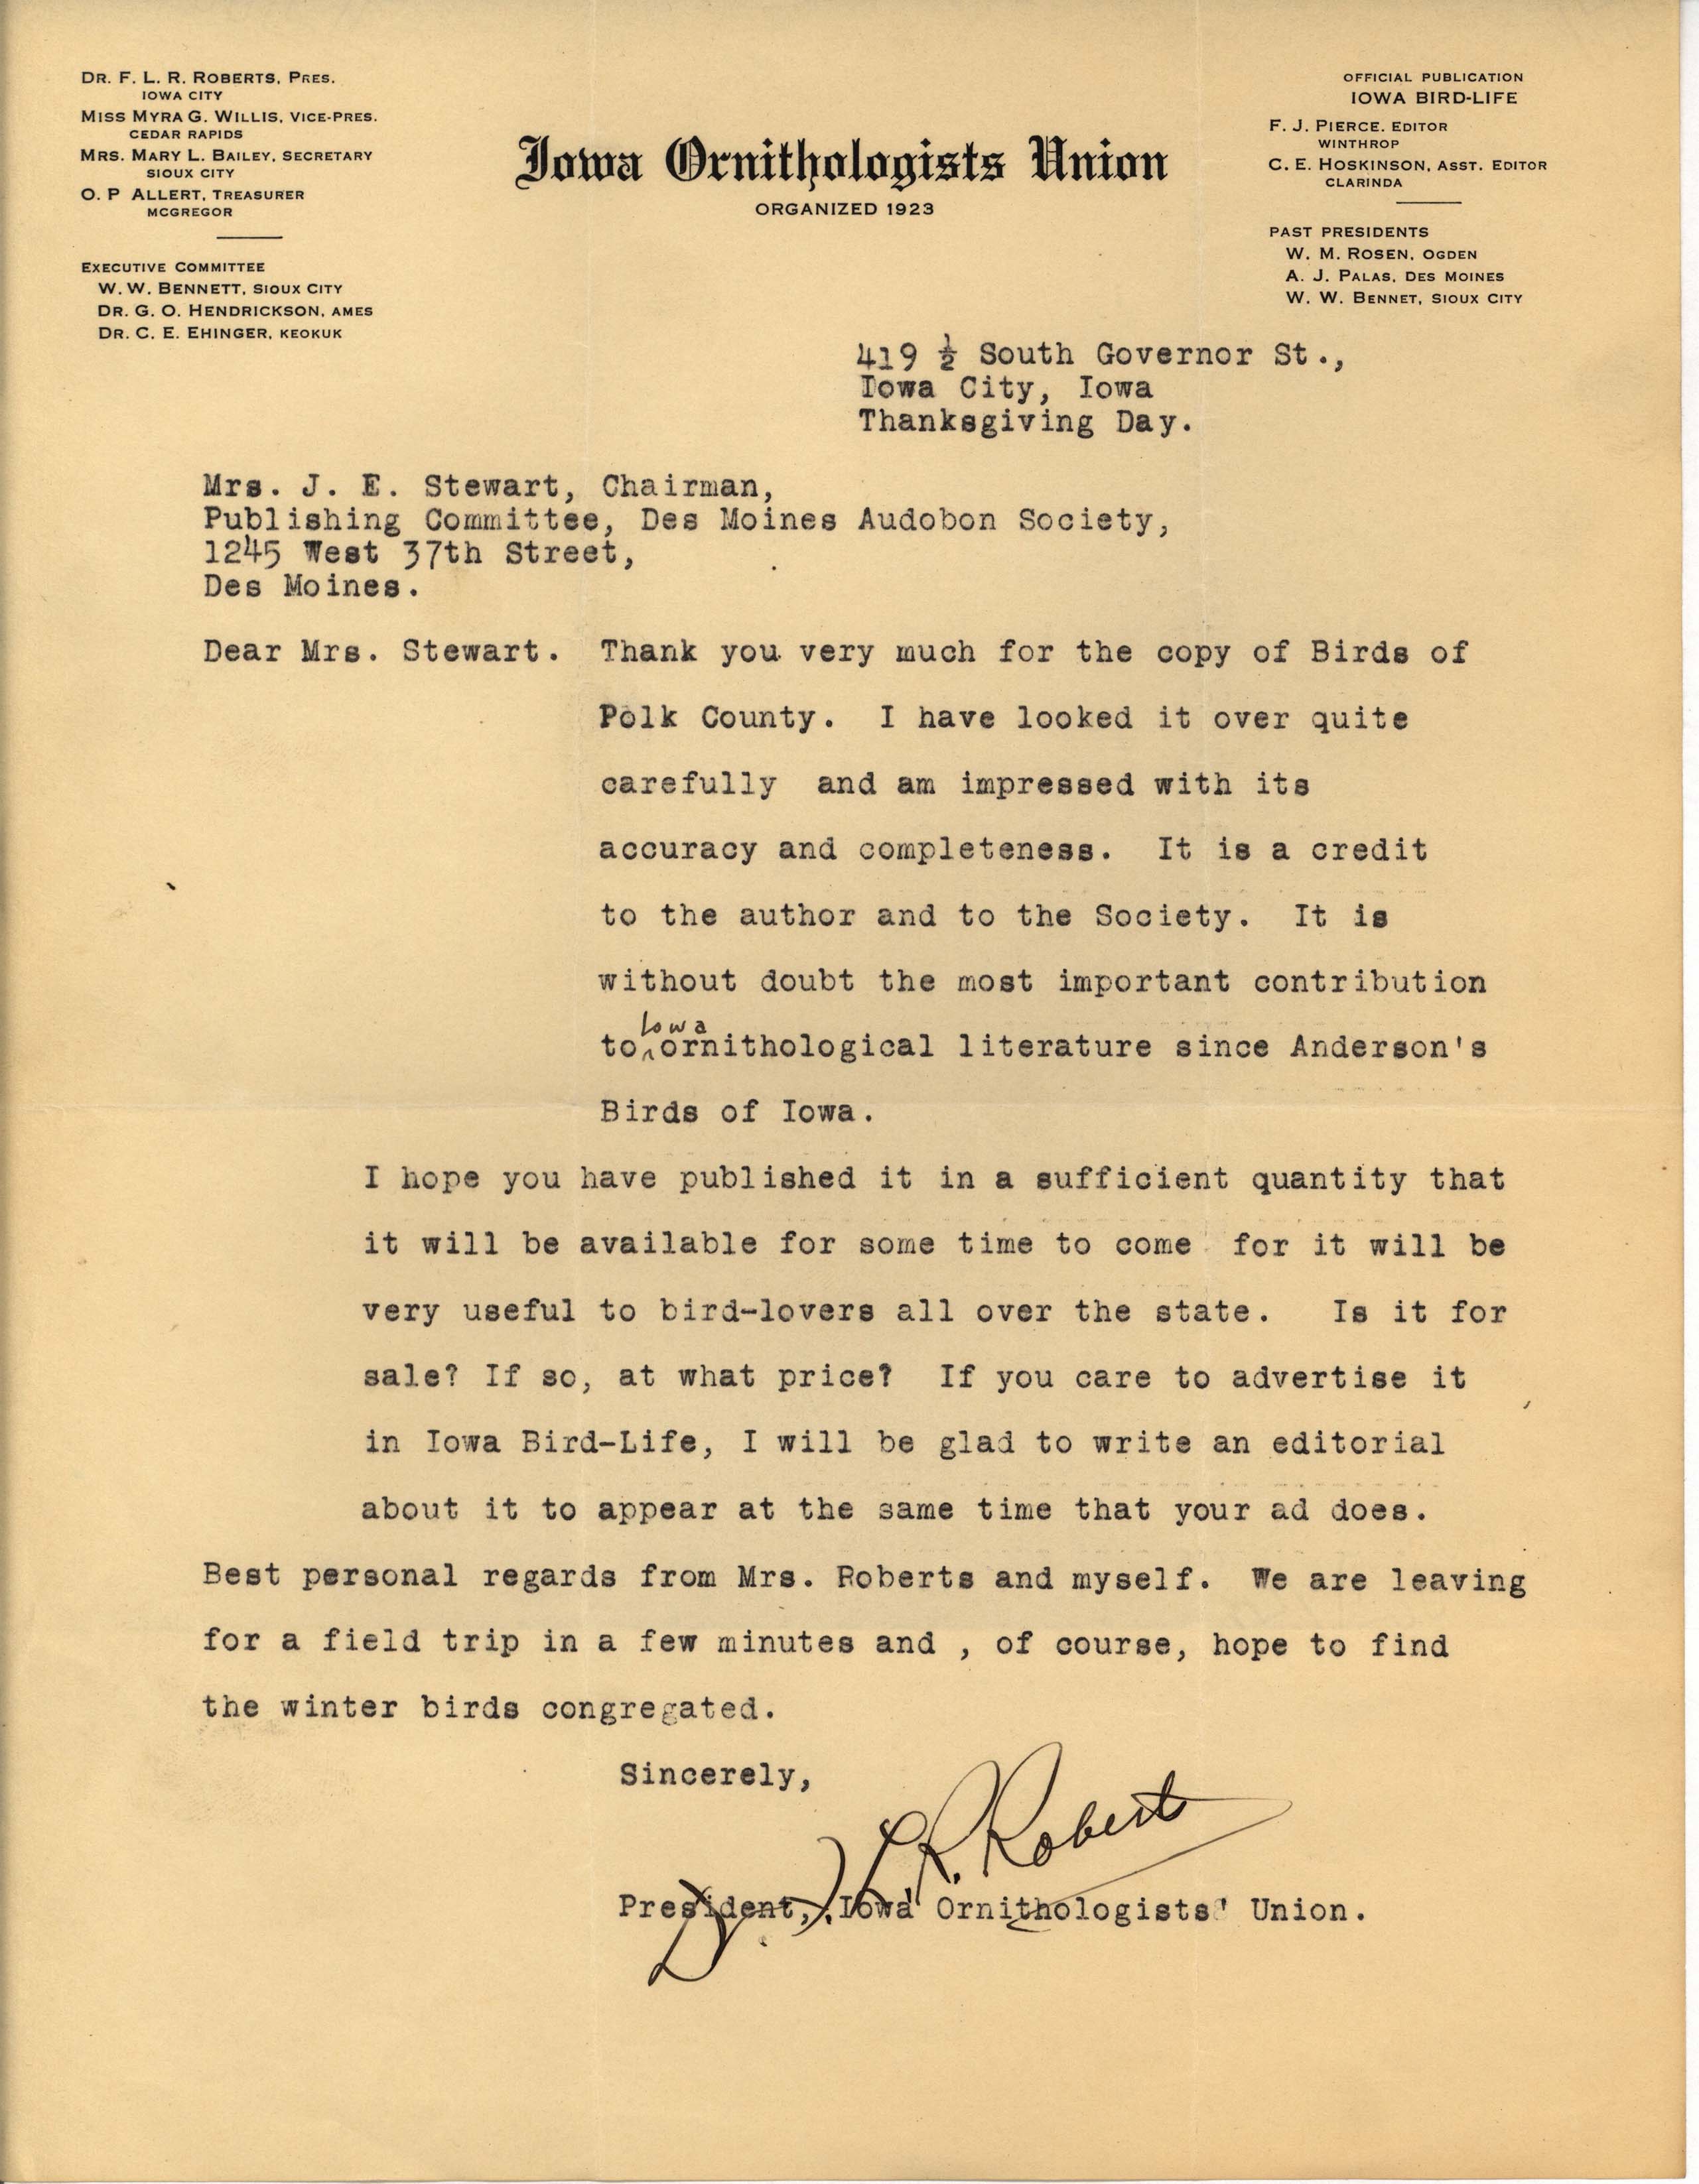 Francis Roberts letter to Mrs. J. E. Stewart regarding advertising the book 